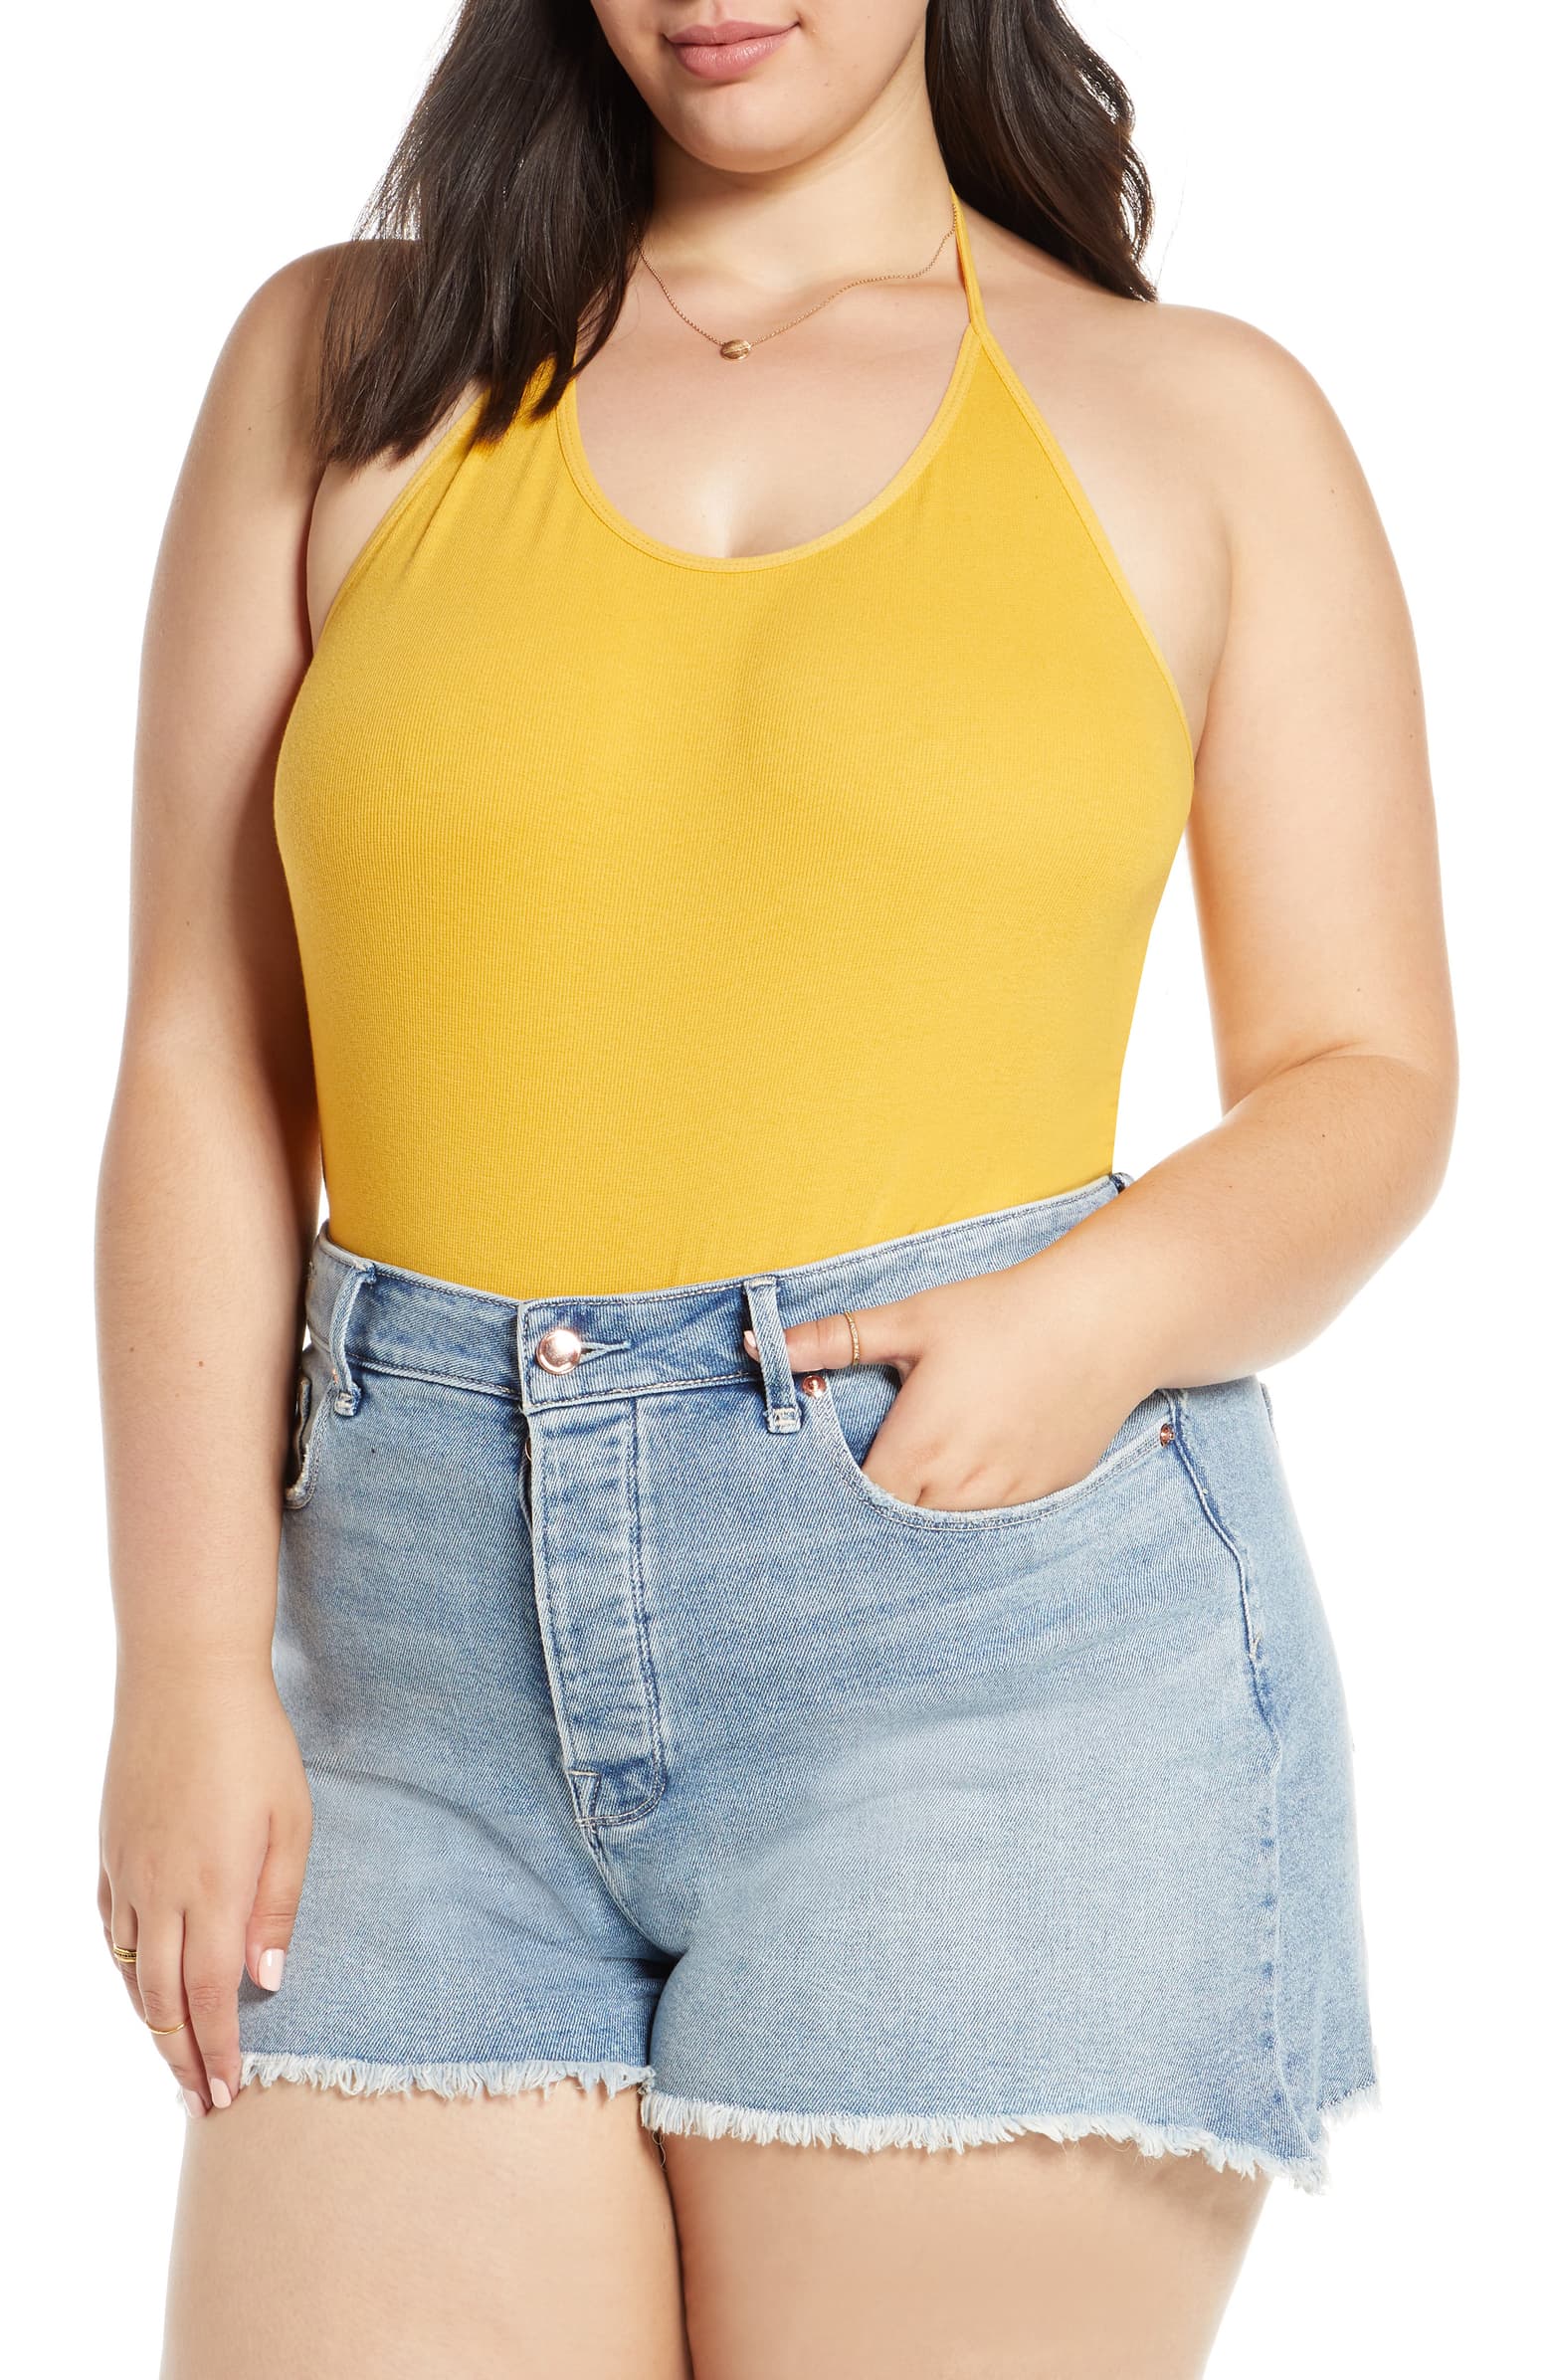 Oh Hey, Curvy Girl! We've Got the ESSENCE Festival Style Essentials You Can't Do Without